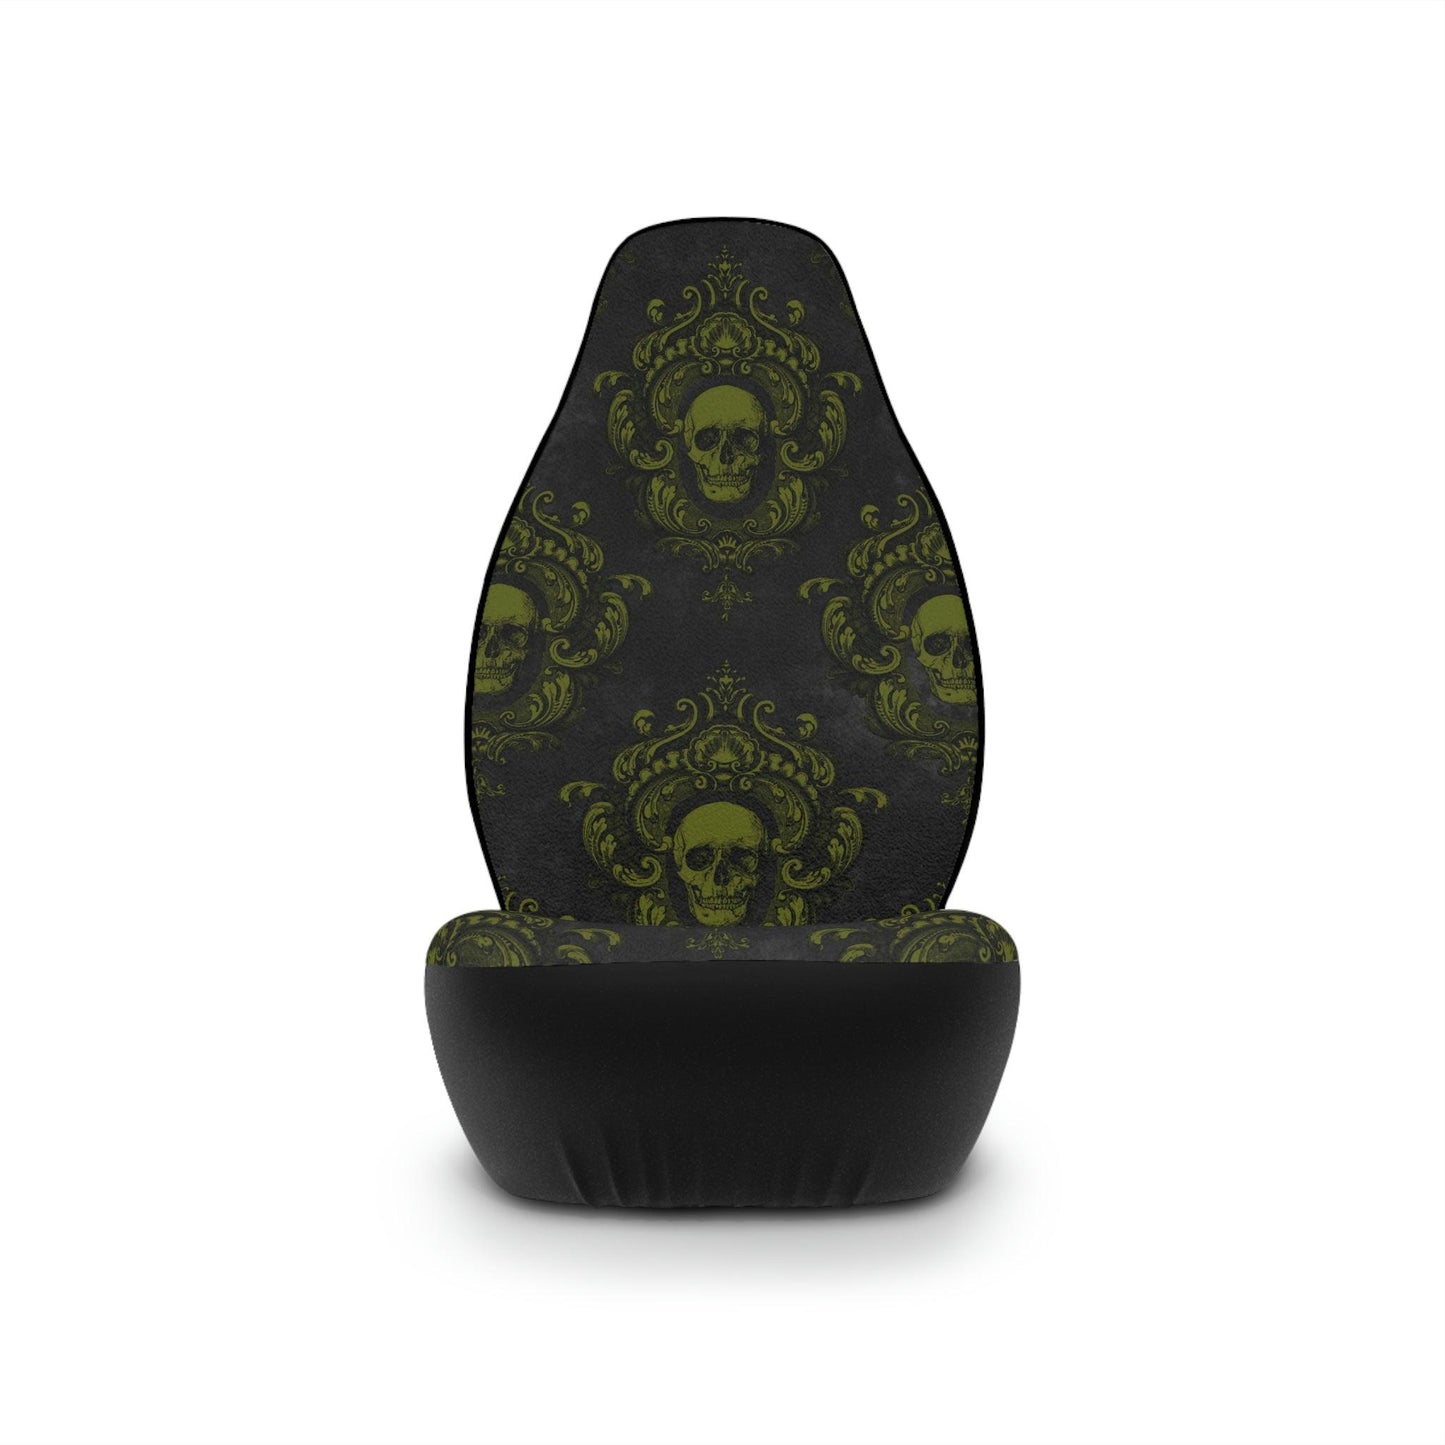 Green Gothic Skulls with Ornate Frames Glam Goth Car Seat Covers | lovevisionkarma.com